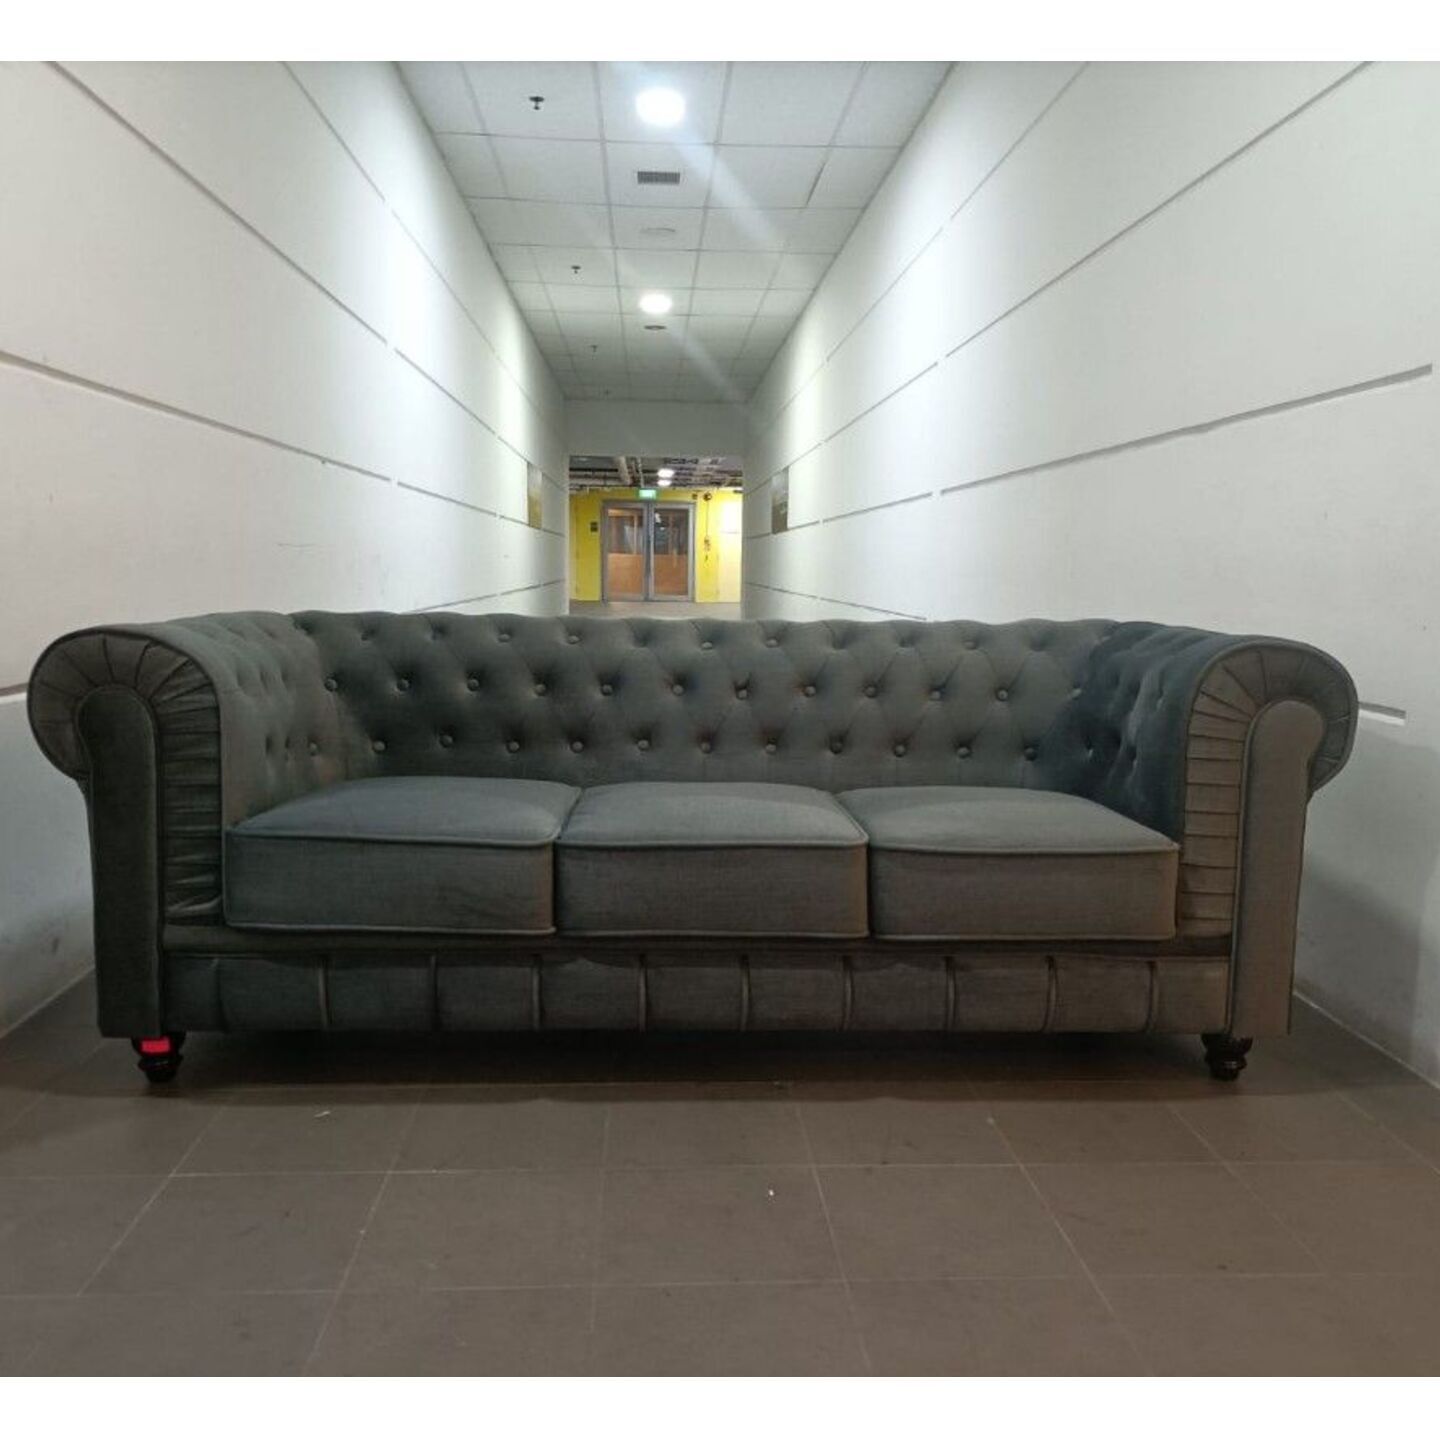 CAT FRIENDLY SALVADO II 3 Seater Chesterfield Sofa in CHARCOAL GREY TECH VELVET 50709-P10